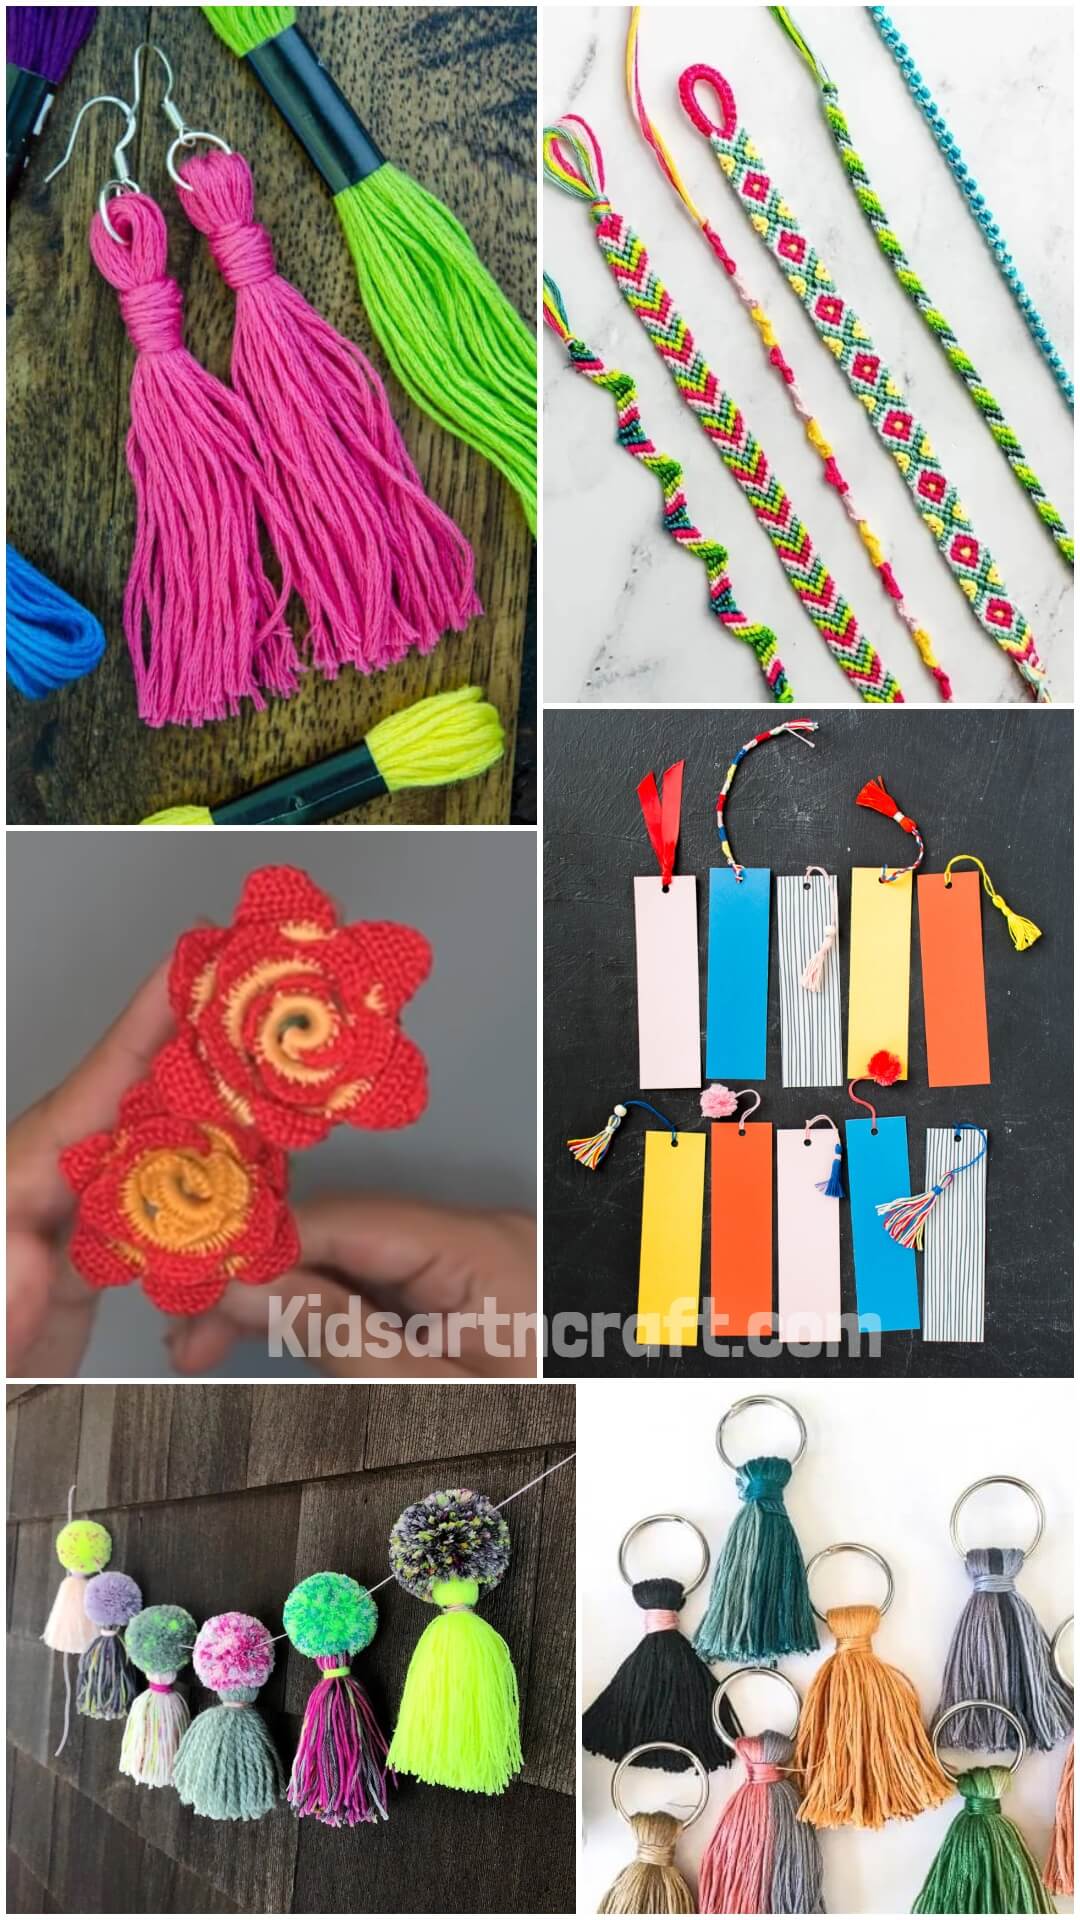 Embroidery Floss Crafts For Adults